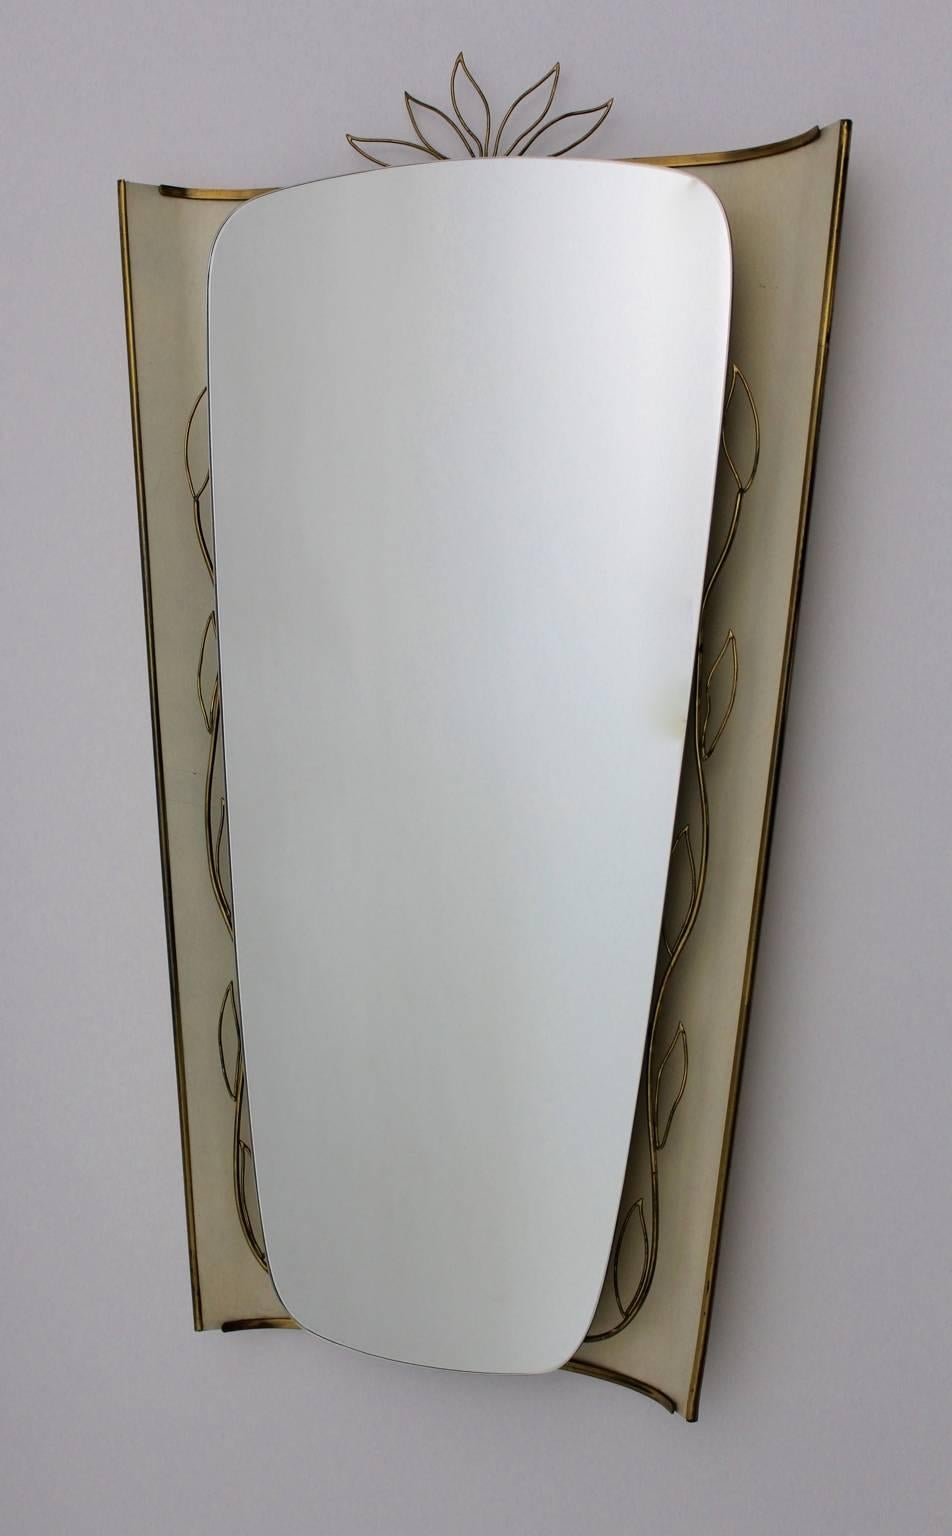 Mid-Century Modern vintage illuminated wall mirror or floor mirror style Gio Ponti ,1950s Germany, from sheet metal and brass. in buttercream color tone.
While the wall mirror shows delicate curved brass decor, the ivory or butter cream lacquered